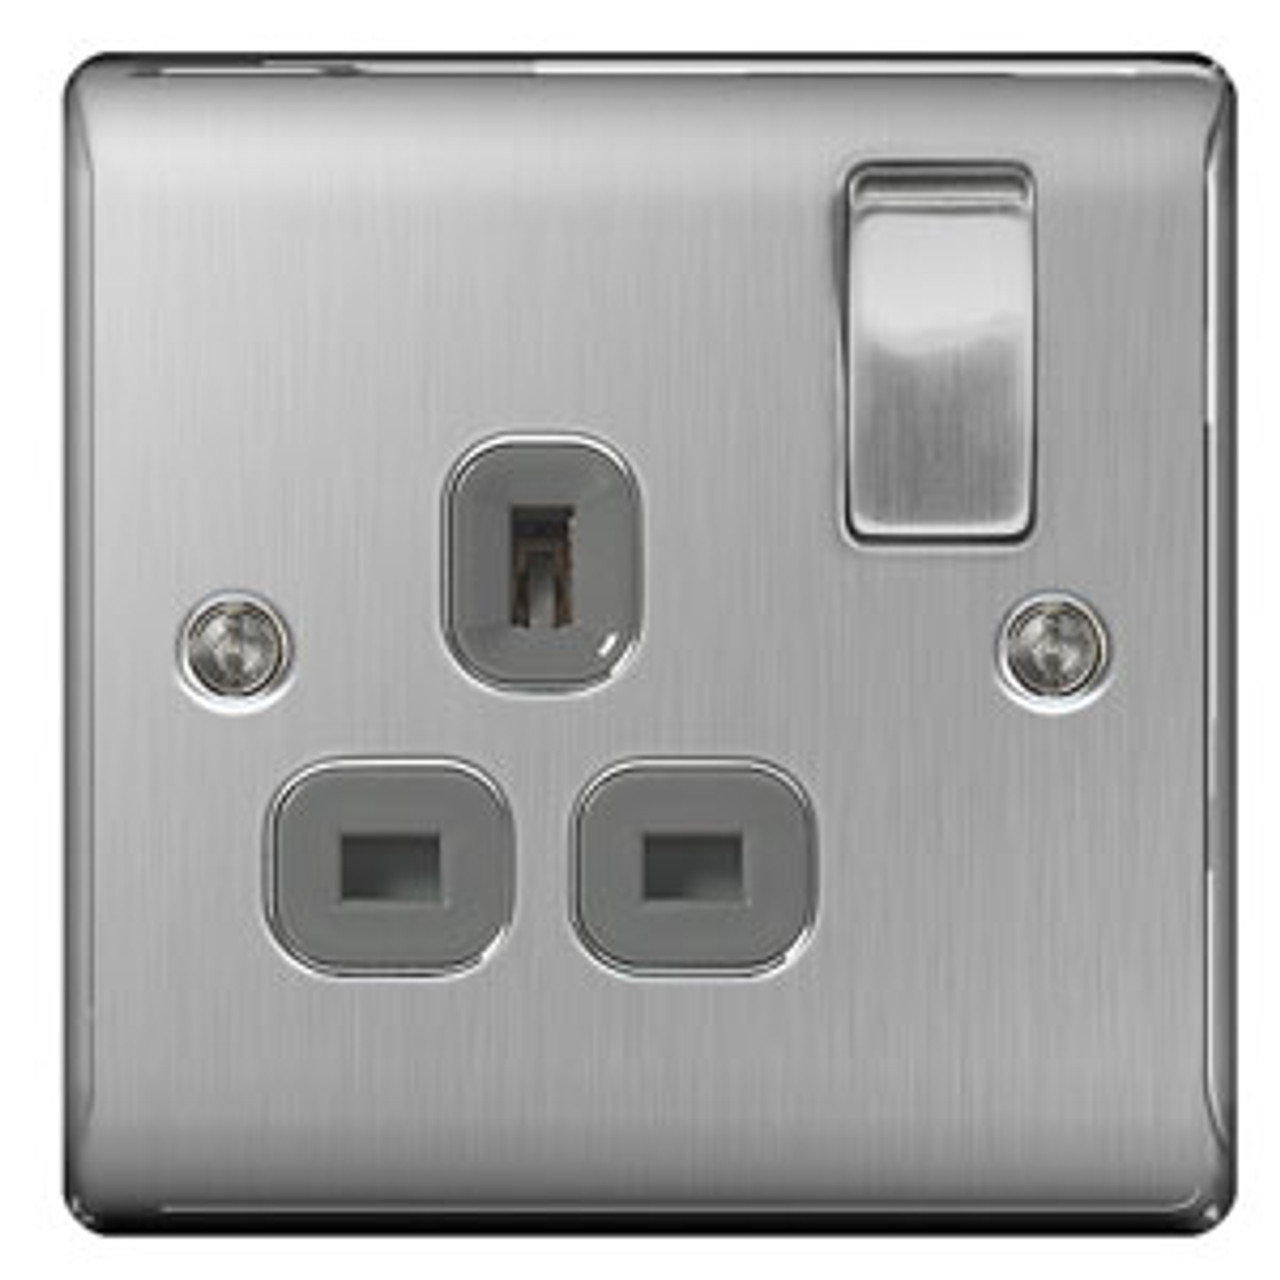 BG Brushed Steel 1 Gang Double Pole Switched 13A Socket - Grey Surround